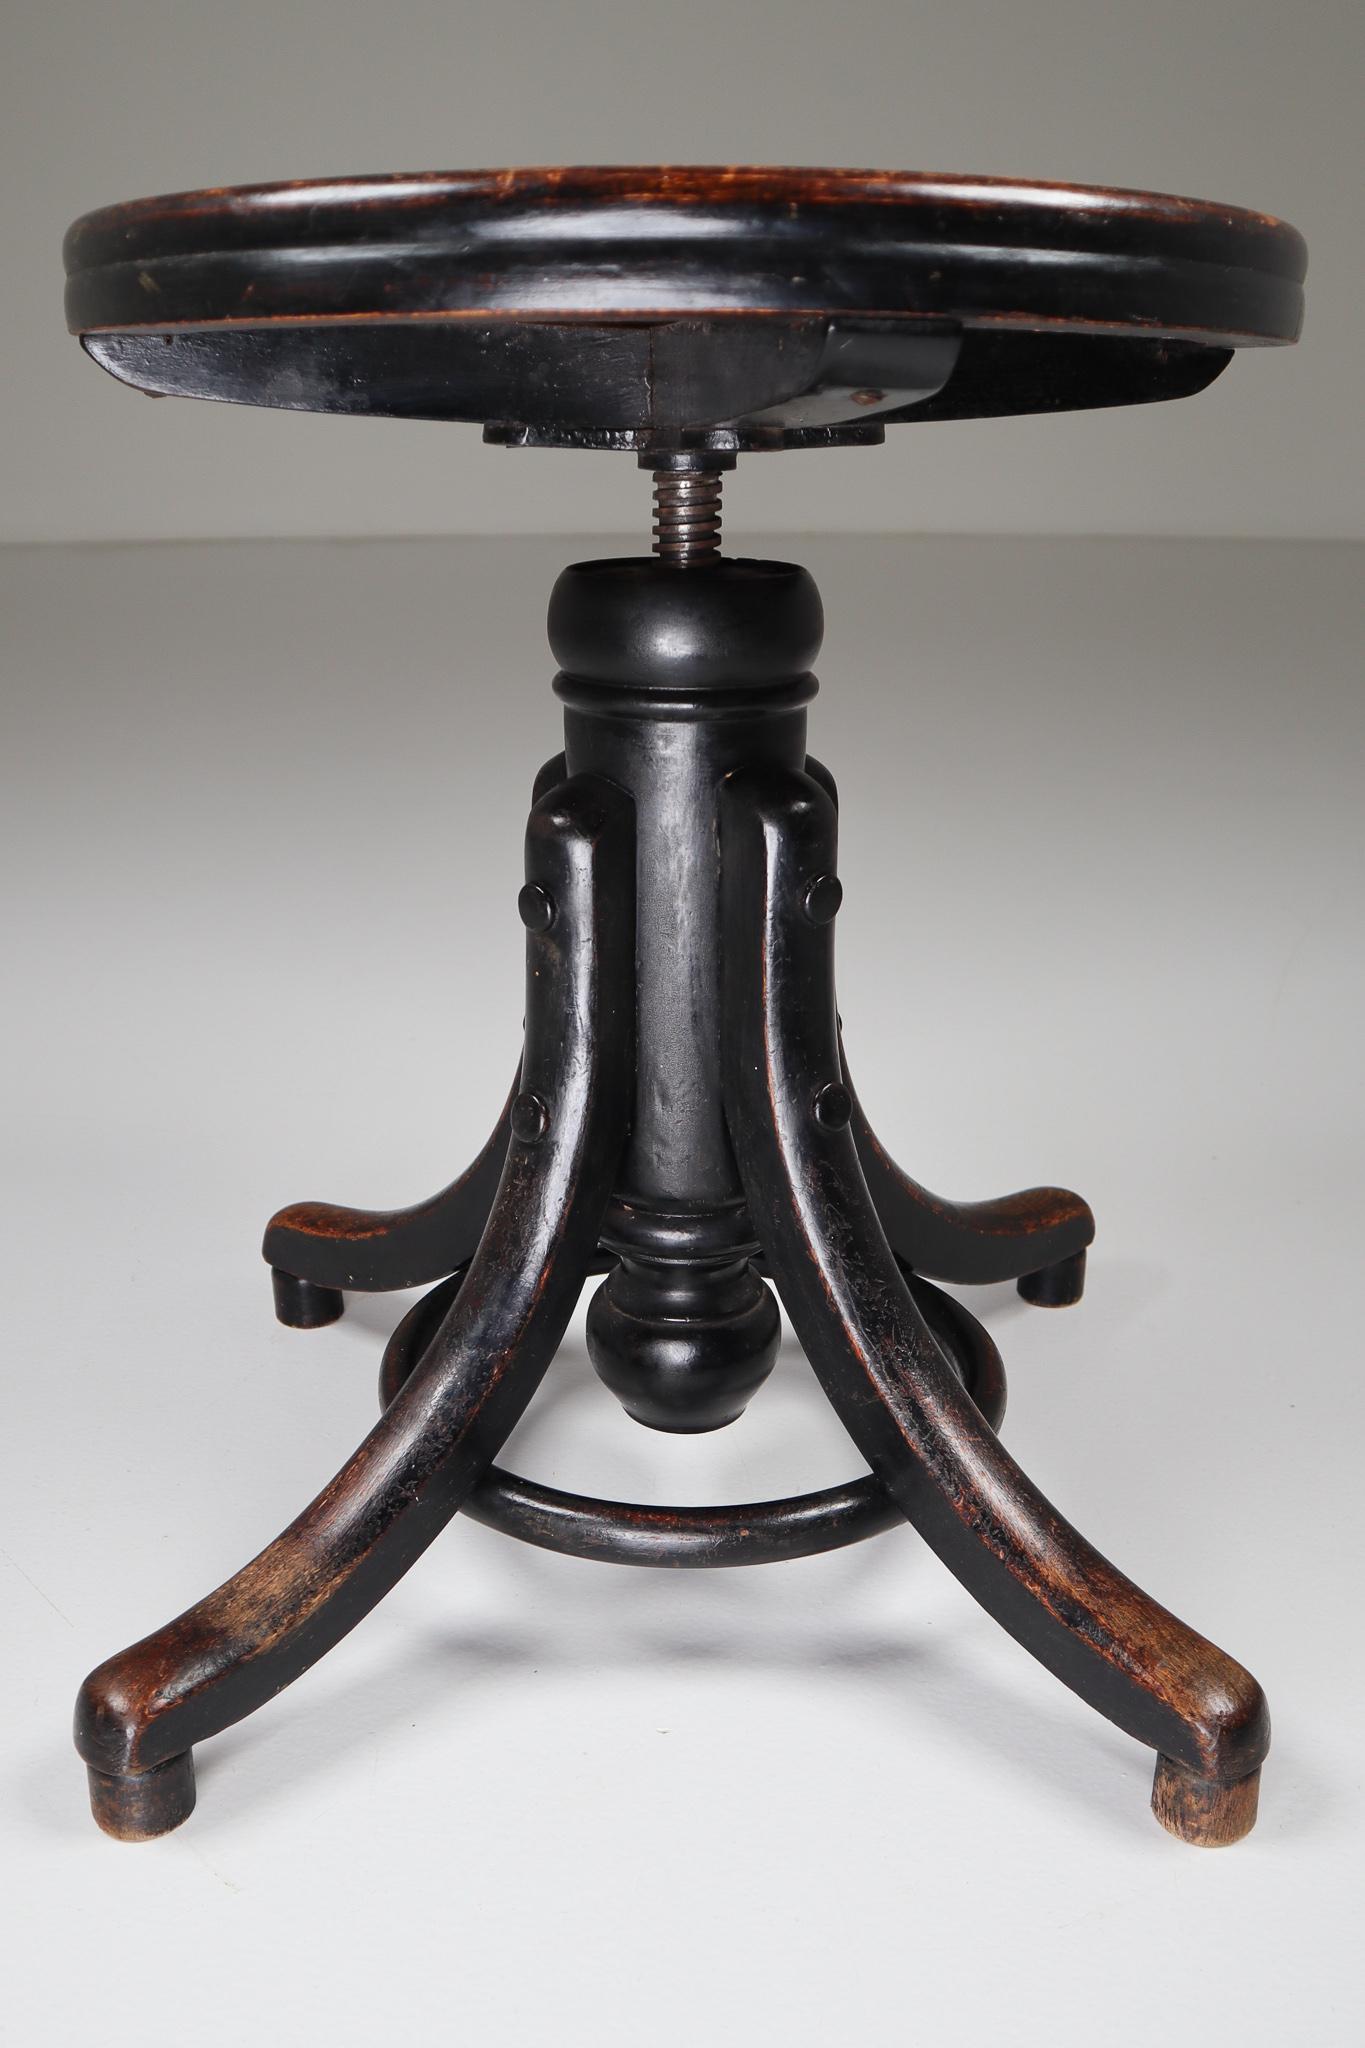 Patinated adjustable piano stool by Thonet. Bentwood legs with turned wood vertical standard, and wood disk form seat. Seat spins to adjust height (Total H in upper position 66 inch x 44 cm lower position). Originally designed as piano stool, this